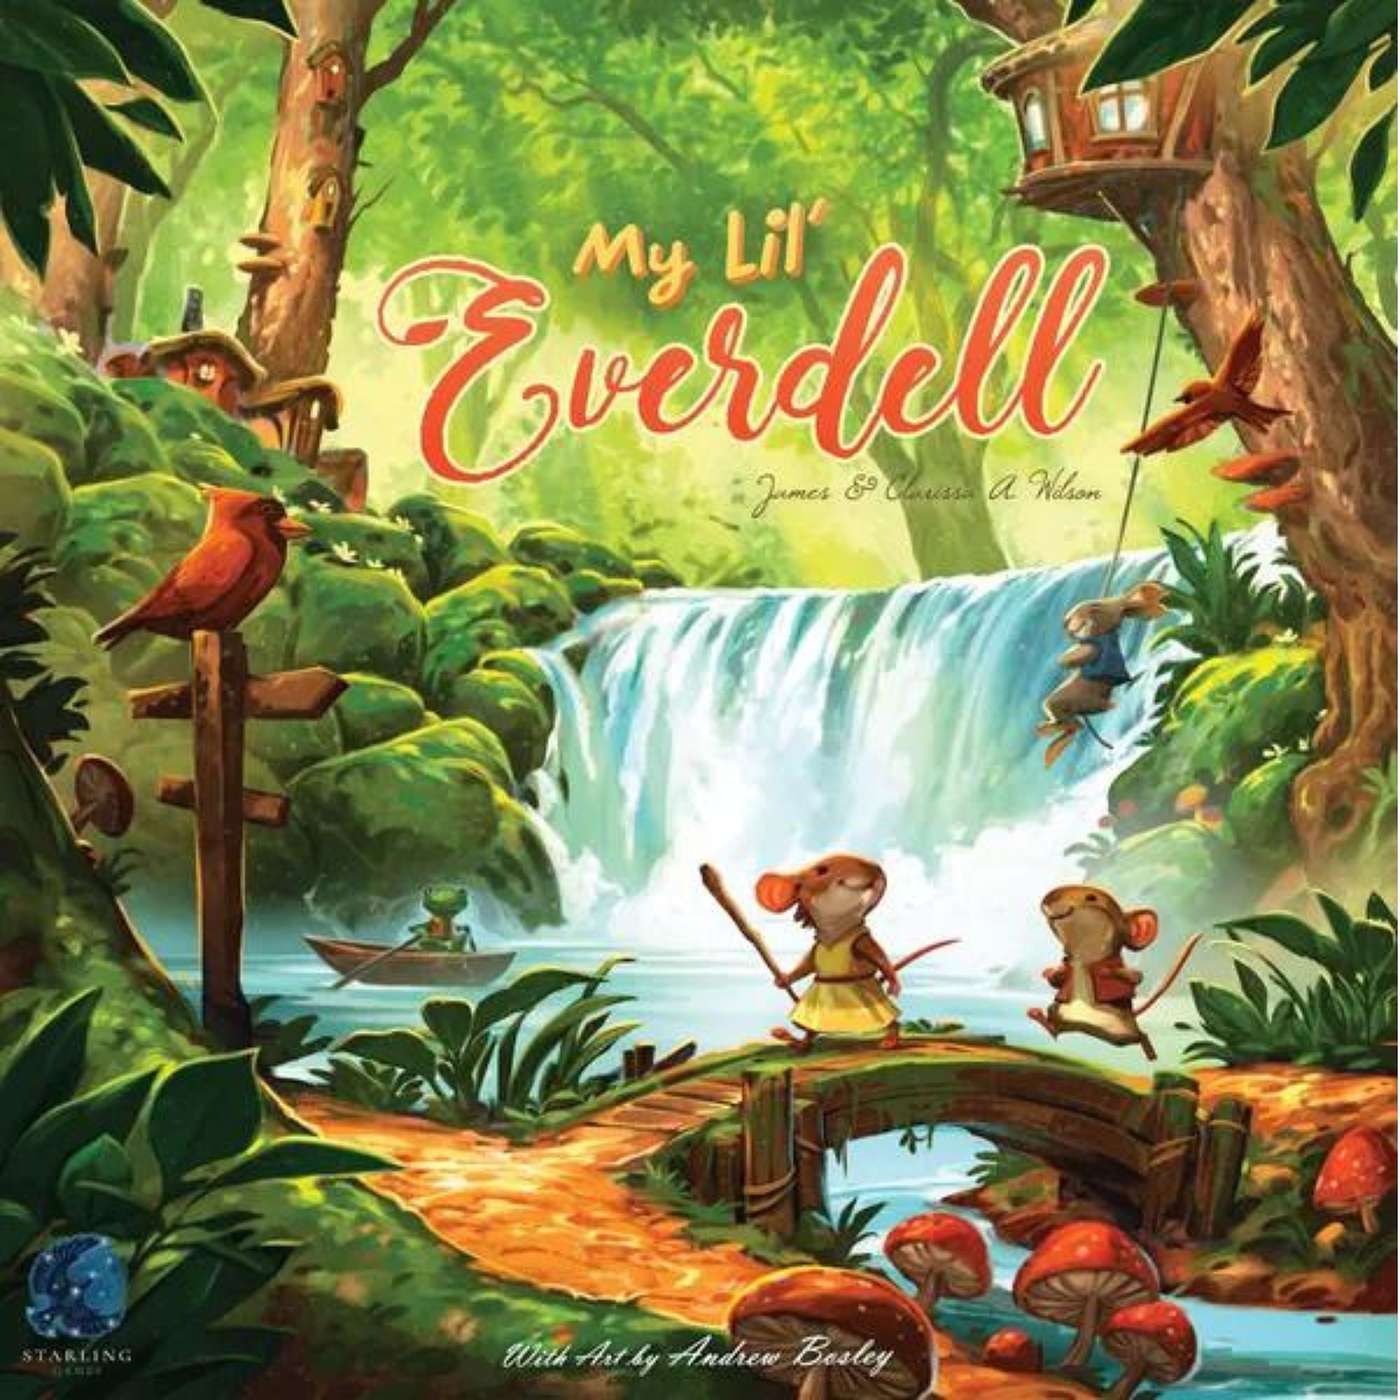 My Lil Everdell: A Kid’s Table Review